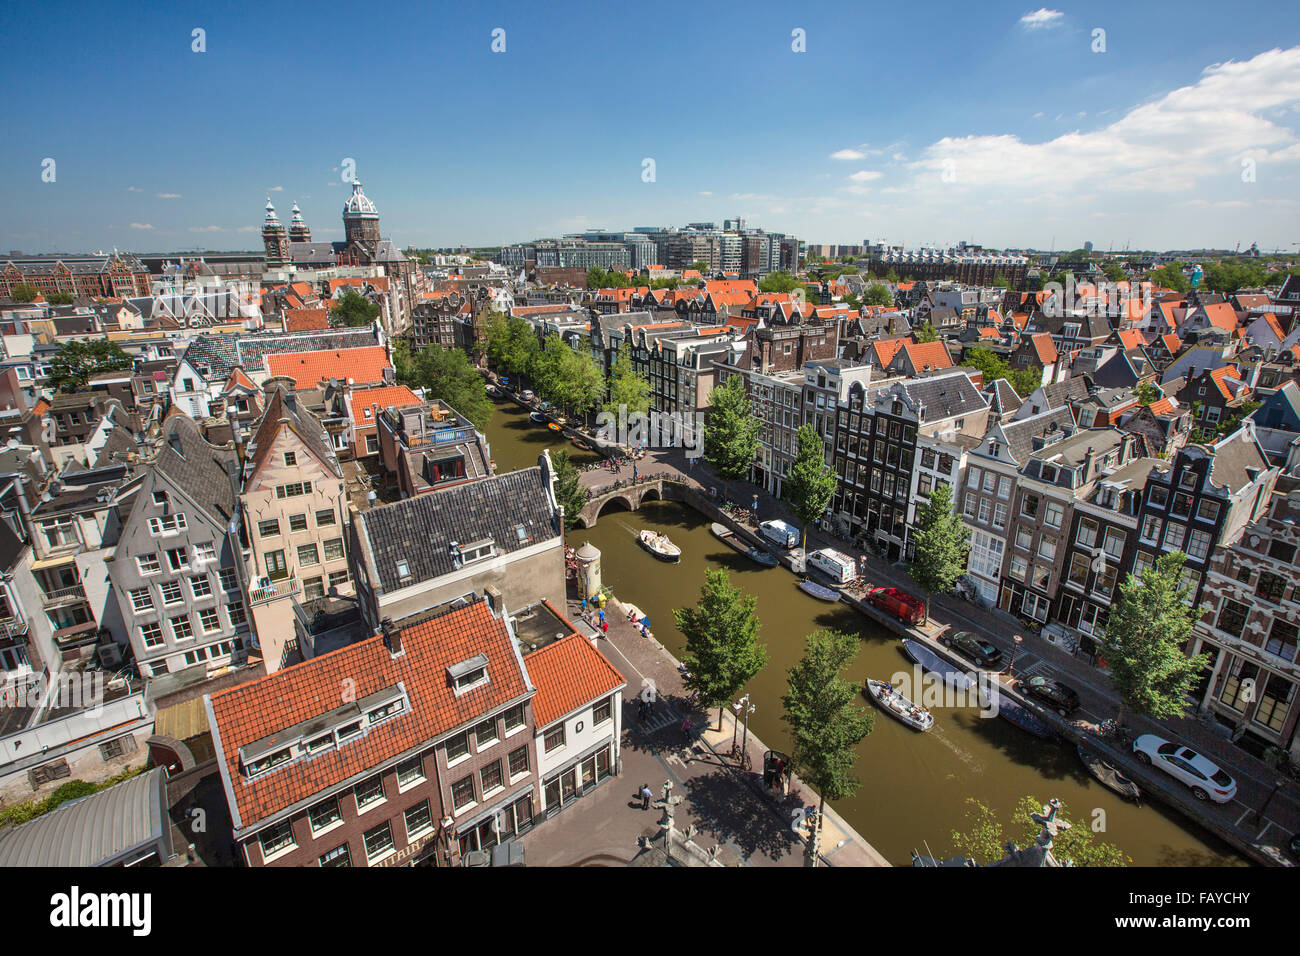 Netherlands, Amsterdam, Aeriel view from Old Church, Oude kerk on canal called Oudezijds Voorburgwal Stock Photo